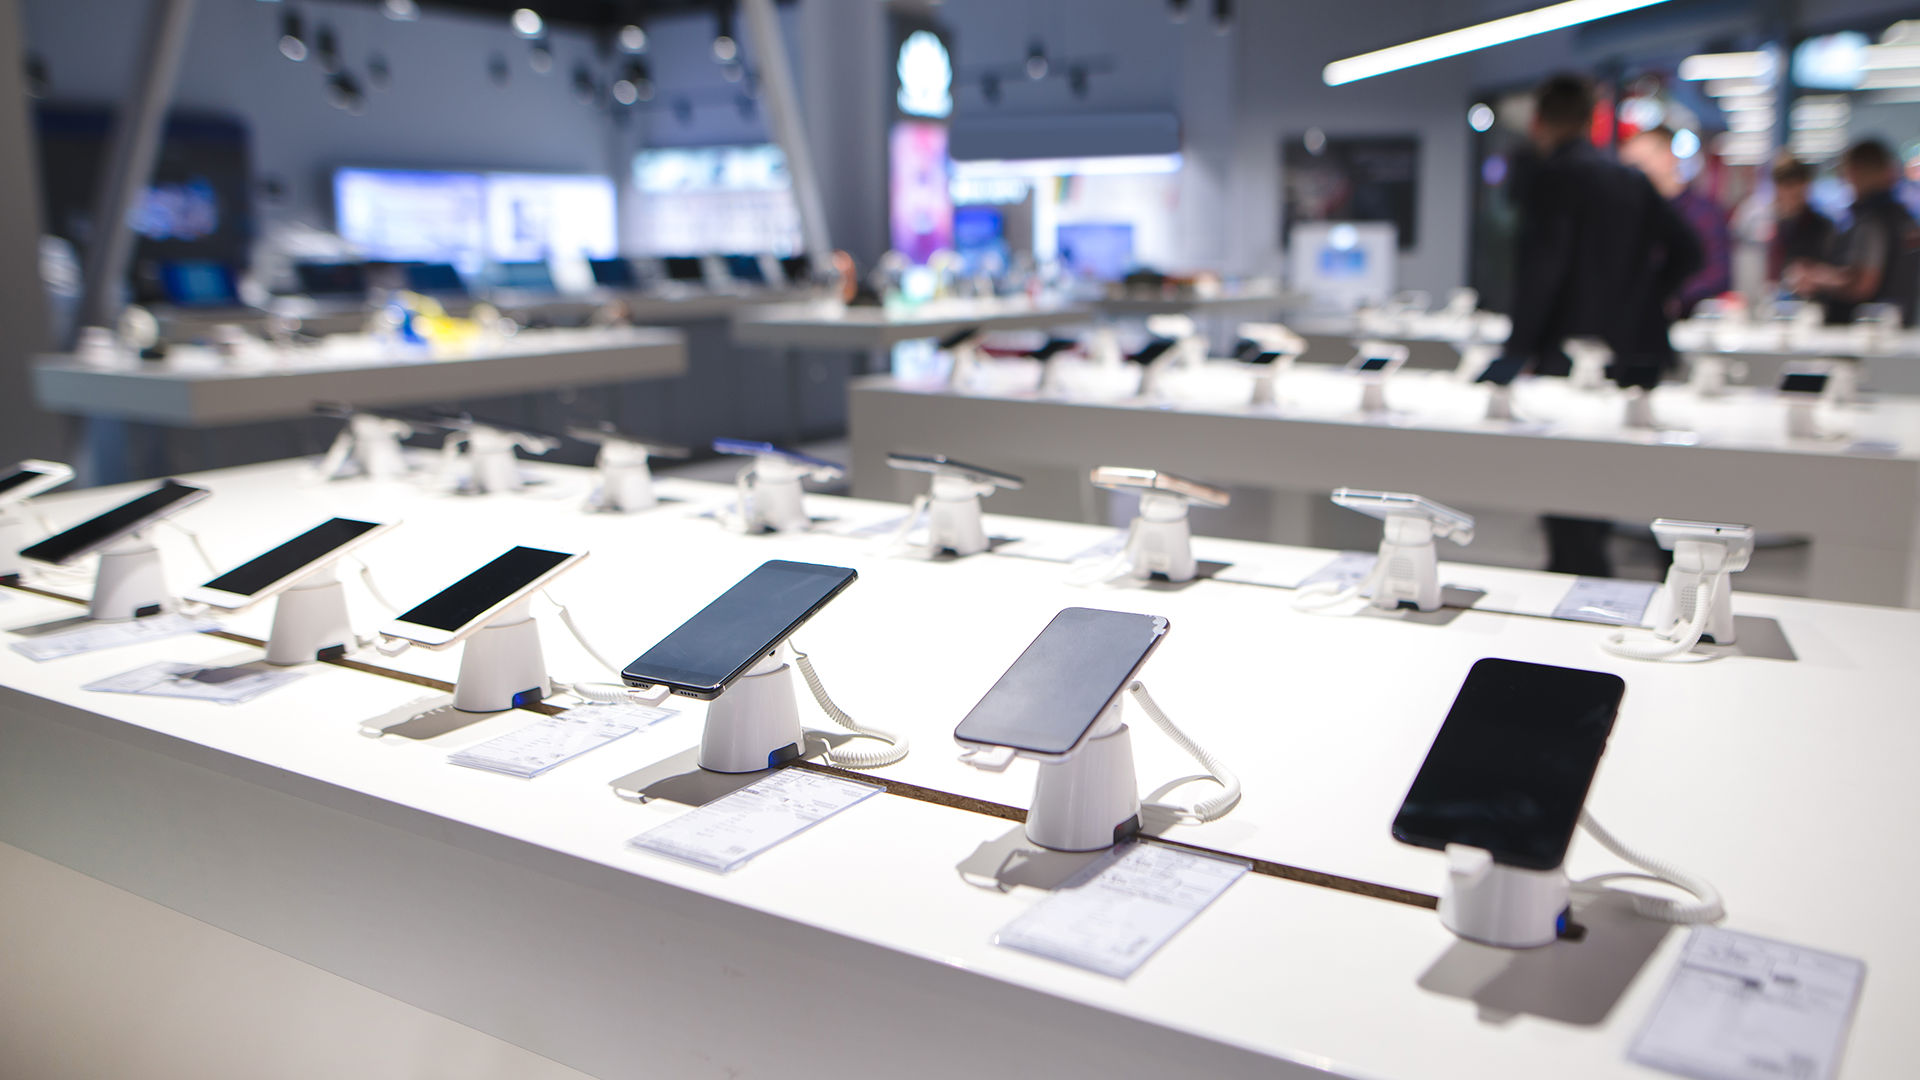 A lineup of new phones at an electronics store.